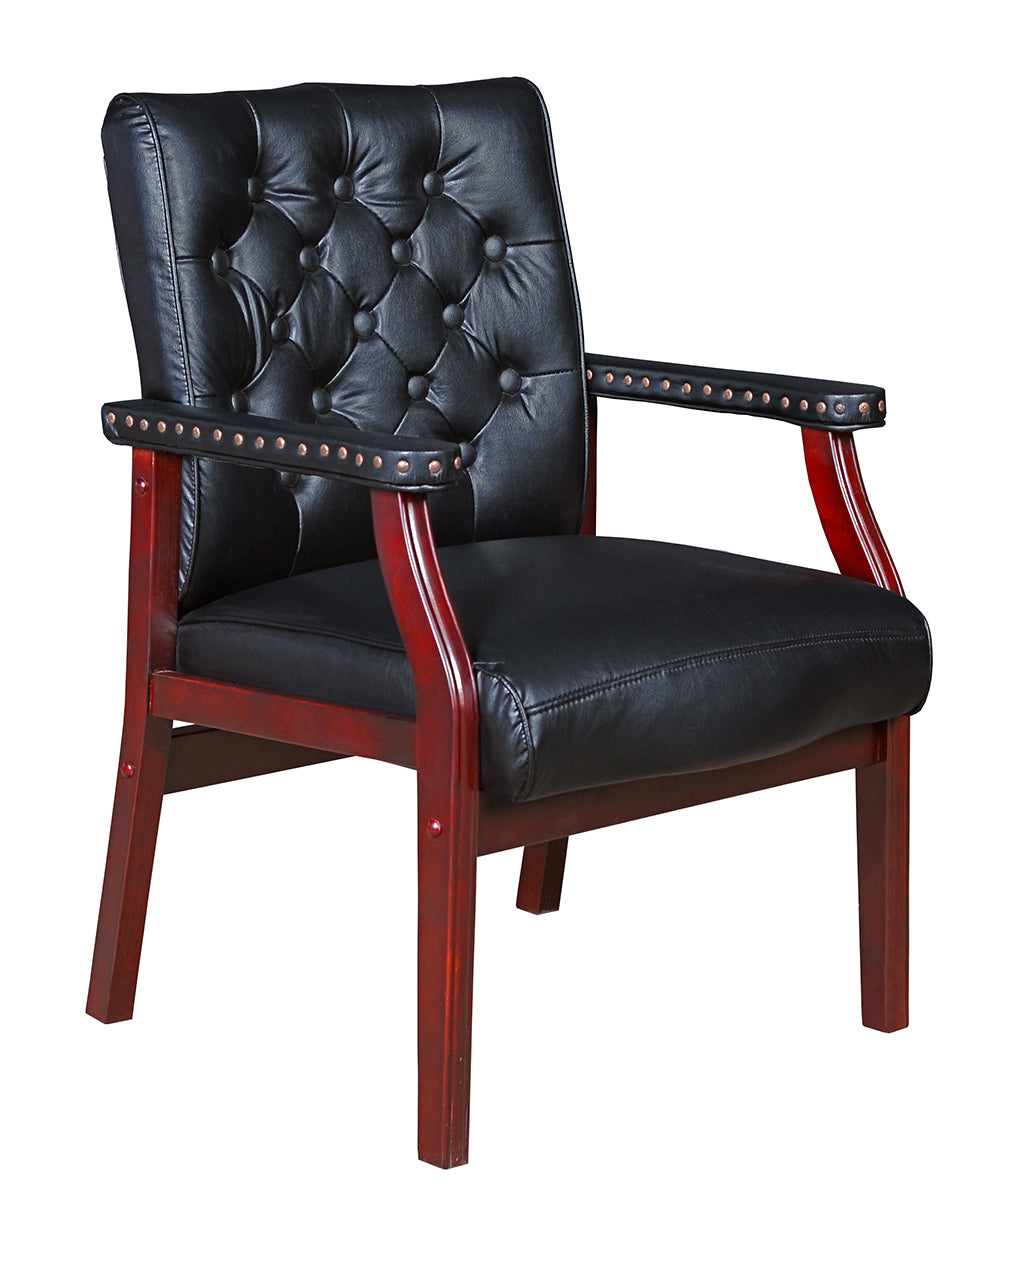 Black Vinyl and Mahogany Conference / Guest Chair